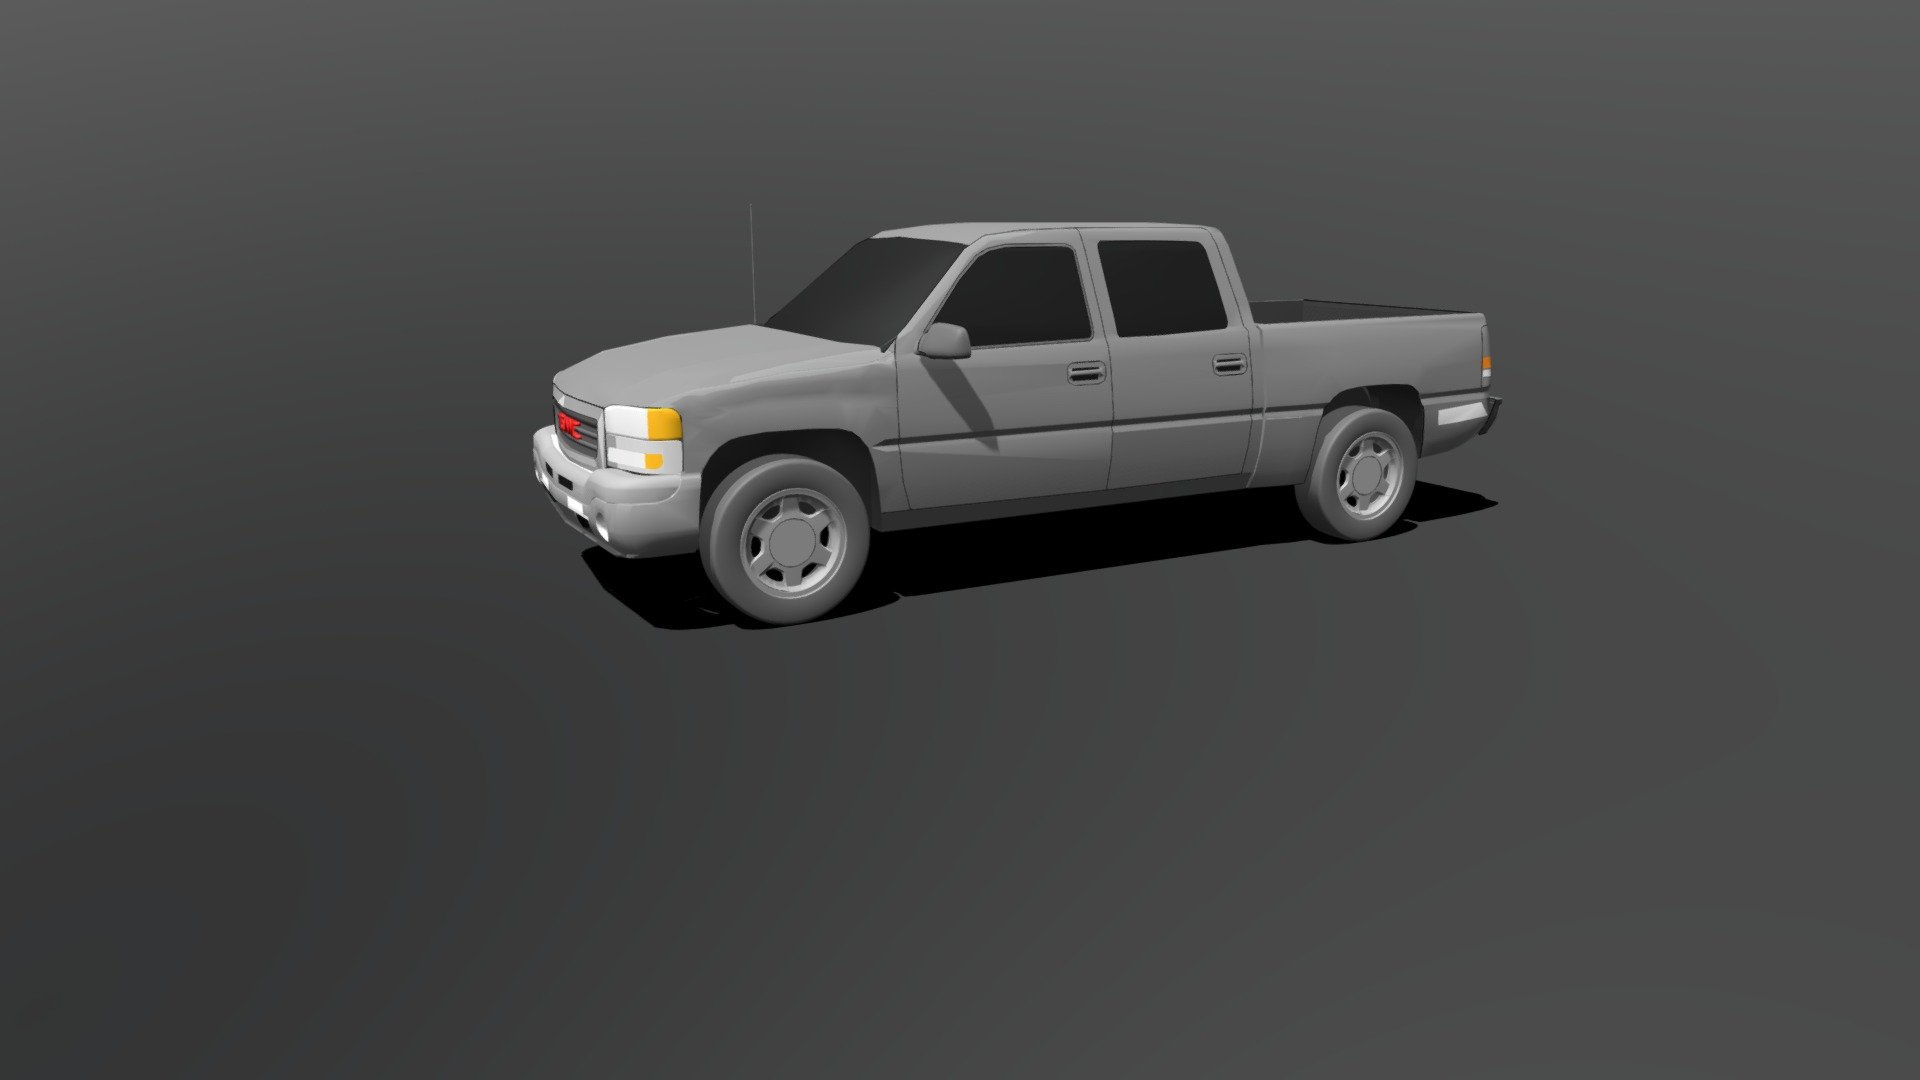 2005-gmc-sierra-download-free-3d-model-by-david-holiday-f7392a3